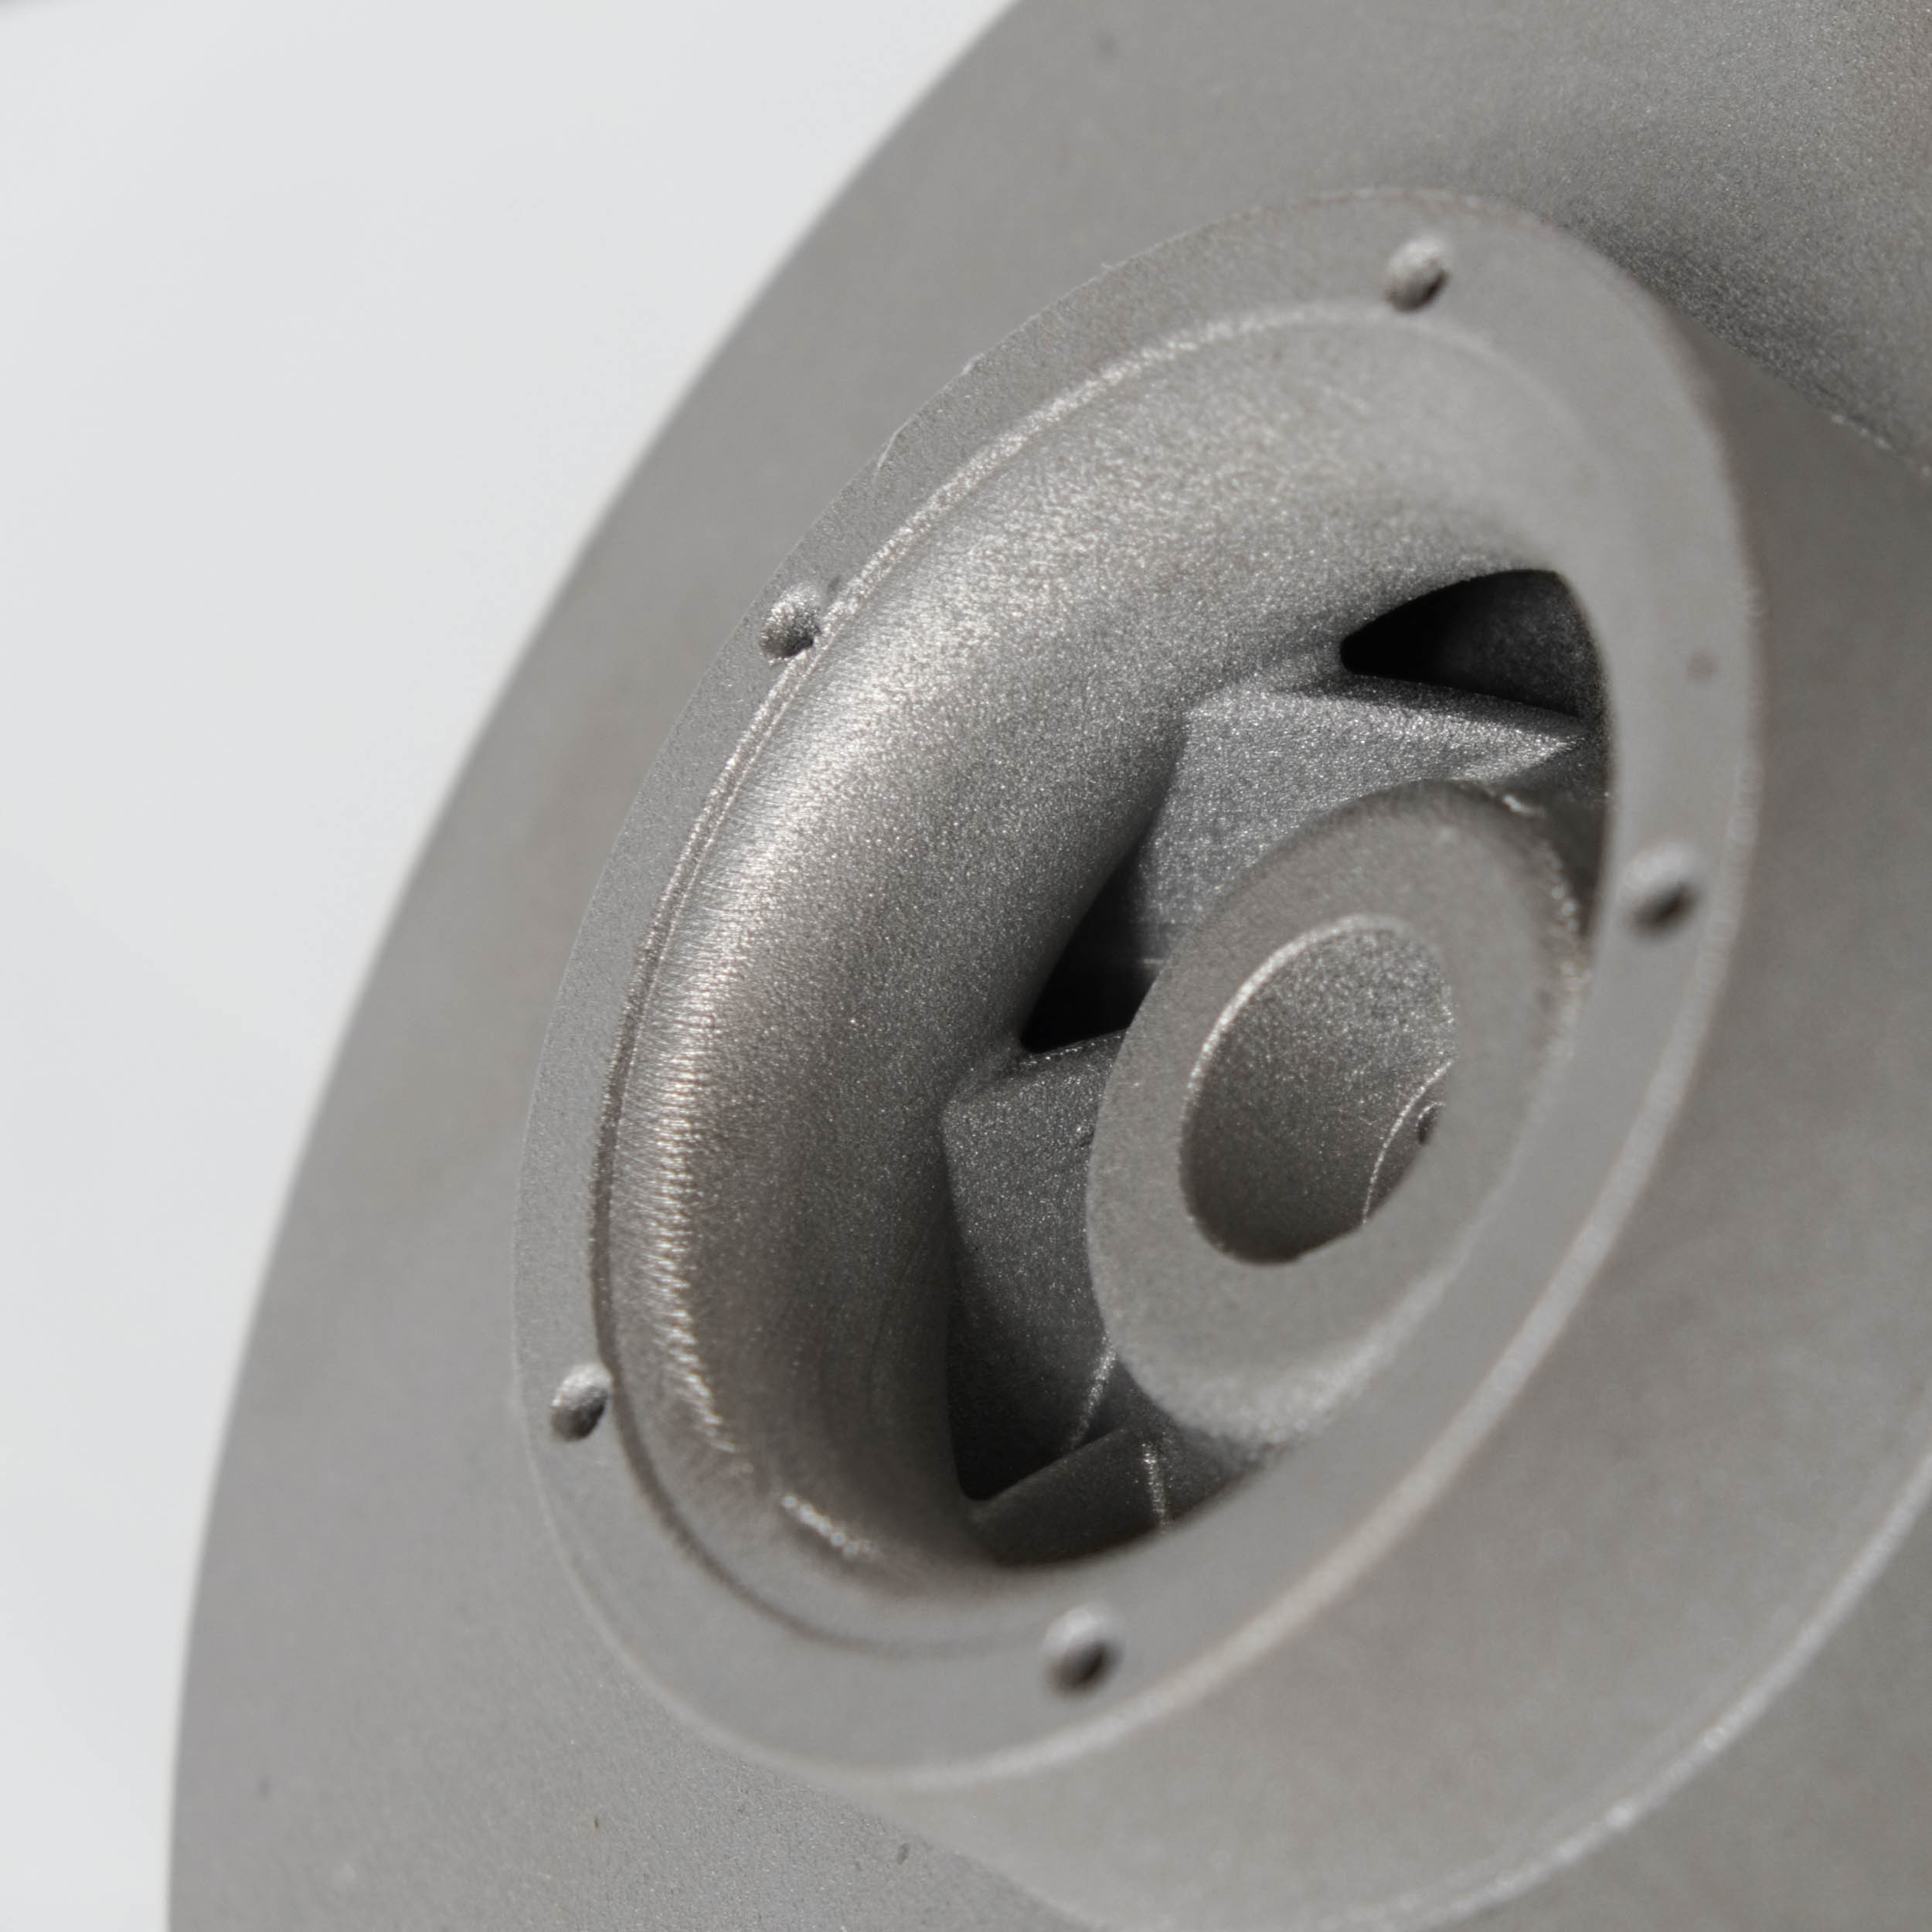 One project focuses on ensuring that metal spare parts and components such as this impeller are according to specifications.